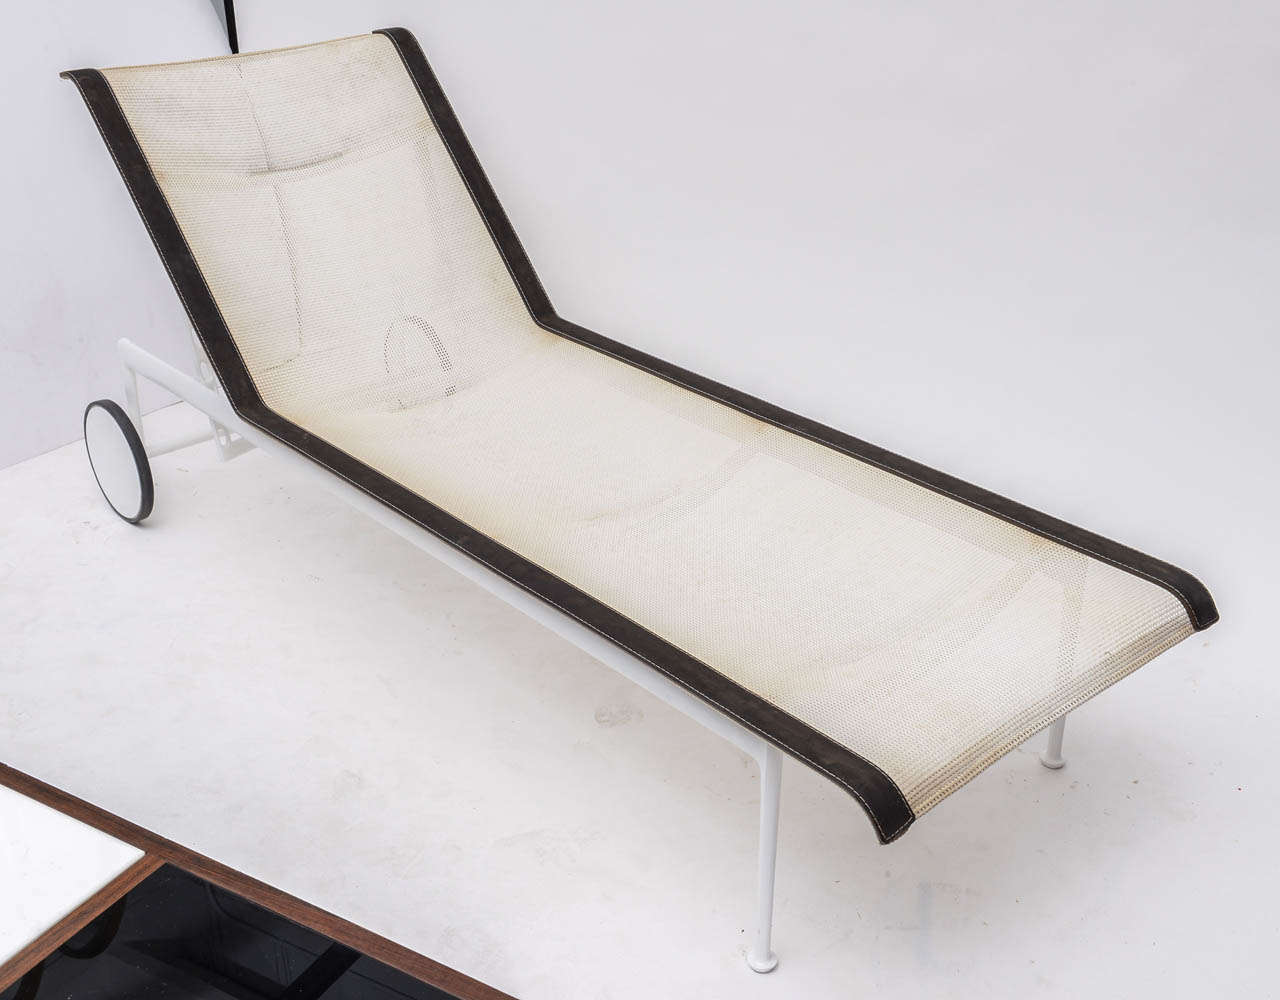 The classic adjustable chaise from the 1966 leisure group.
There are 8 chaises available.Price is per chaise.